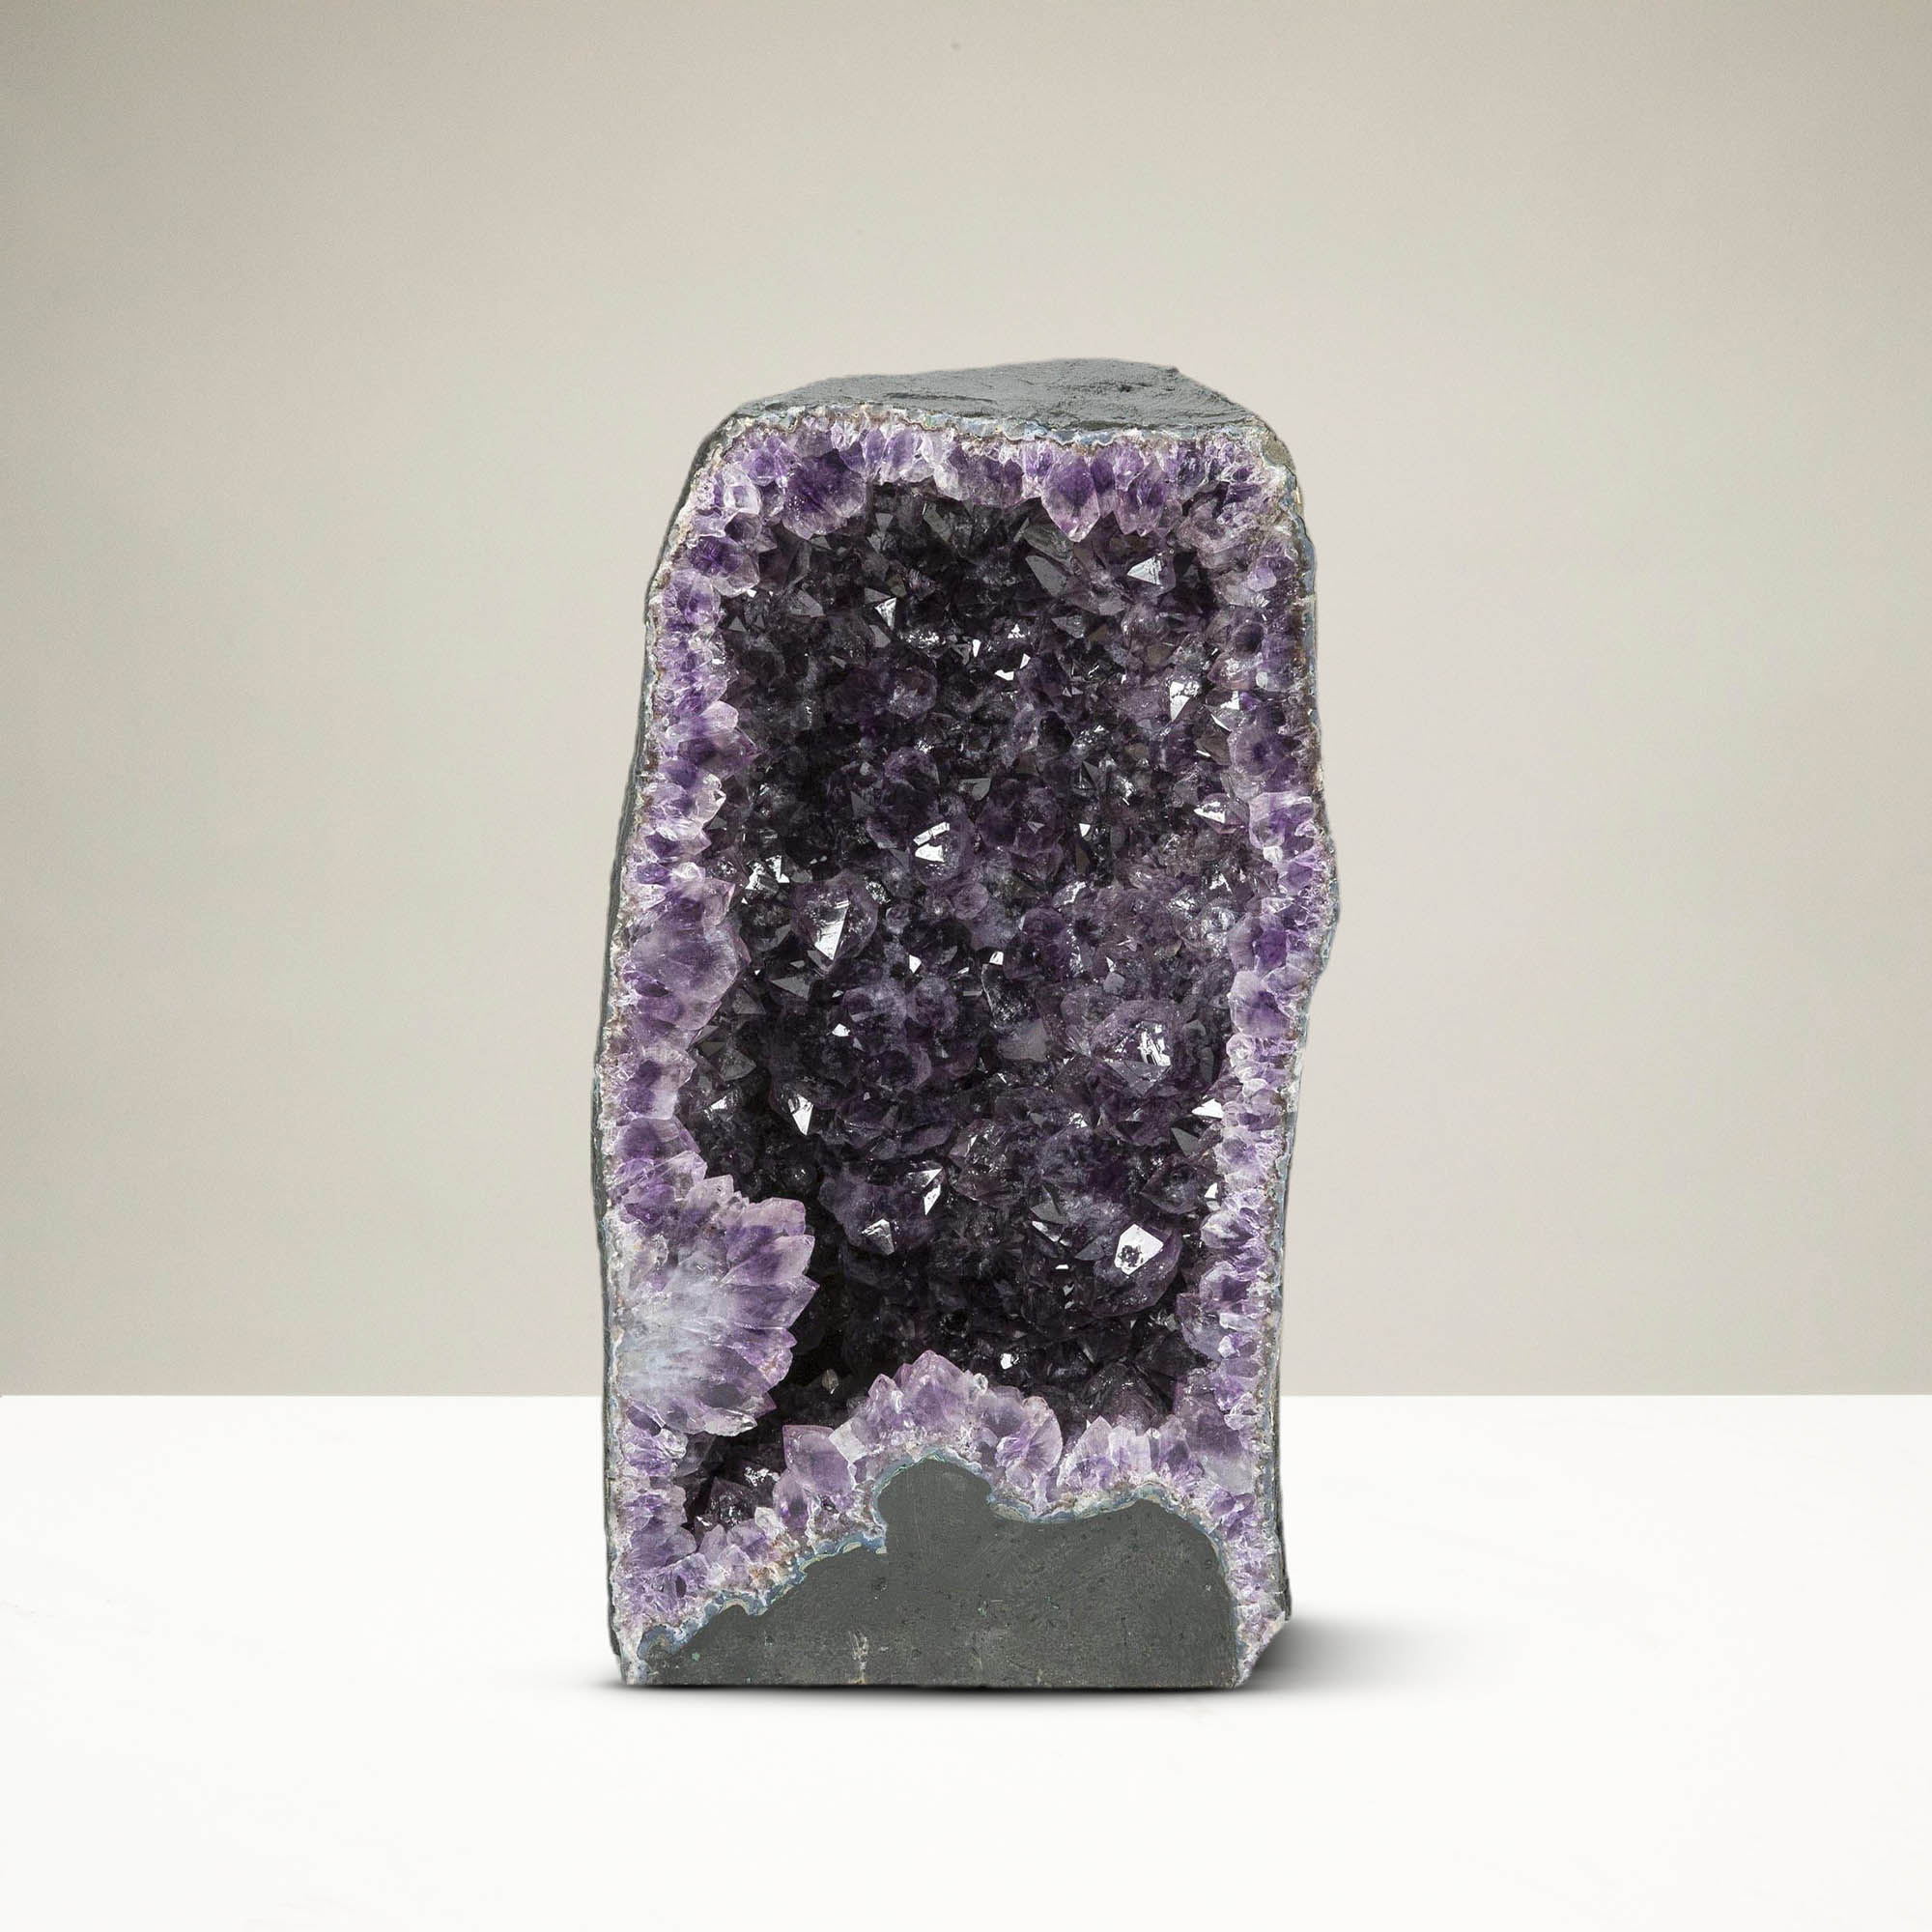 Kalifano Amethyst Natural Brazilian Amethyst Geode Cathedral - 20 in / 86 lbs BAG10000.003